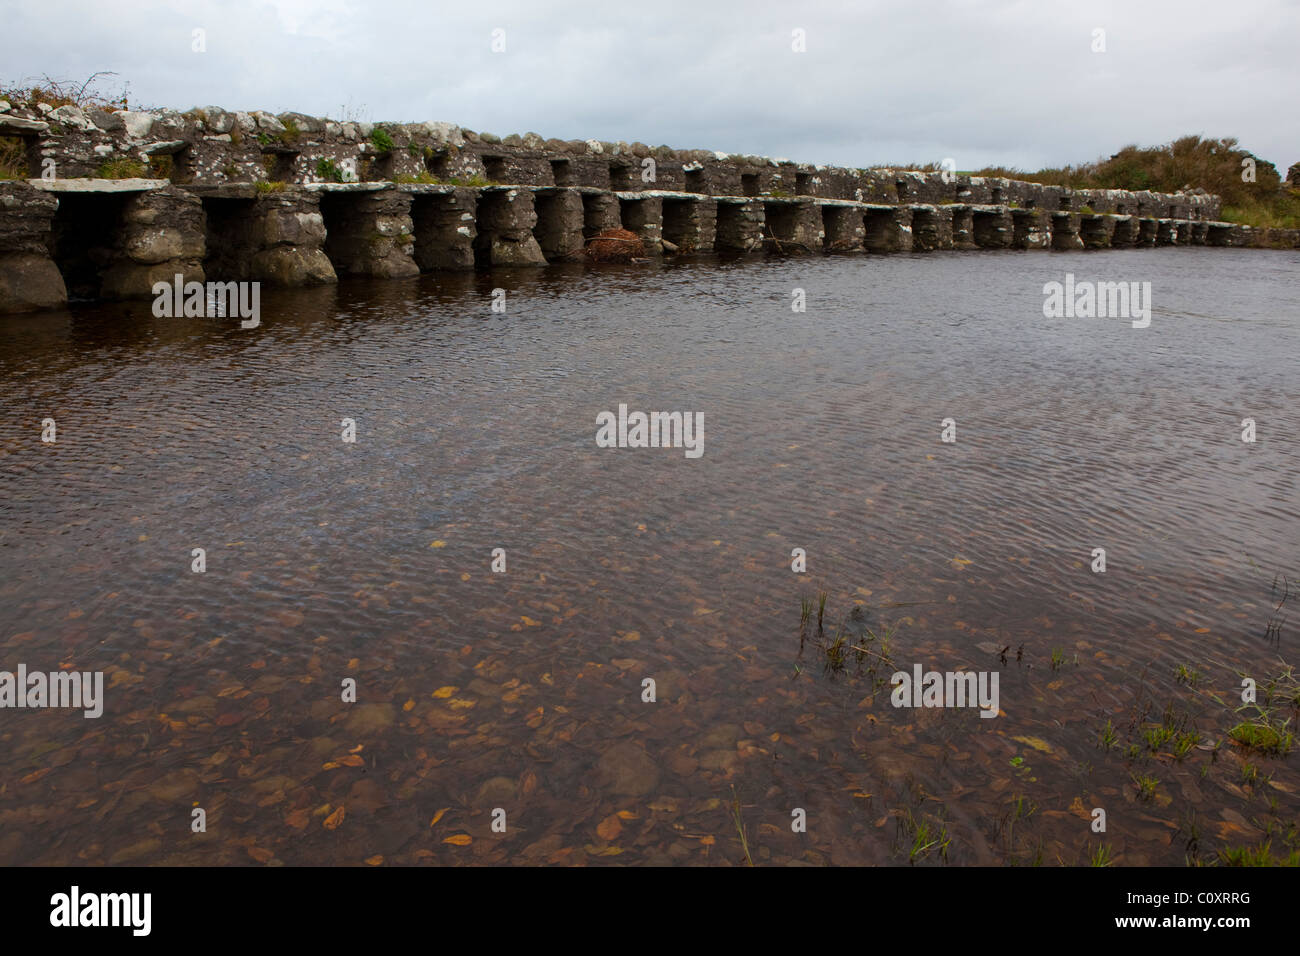 Clapper Bridge, Mayo, built by a John Alexander, a member of a Protestant colony in the 1840s. Stock Photo